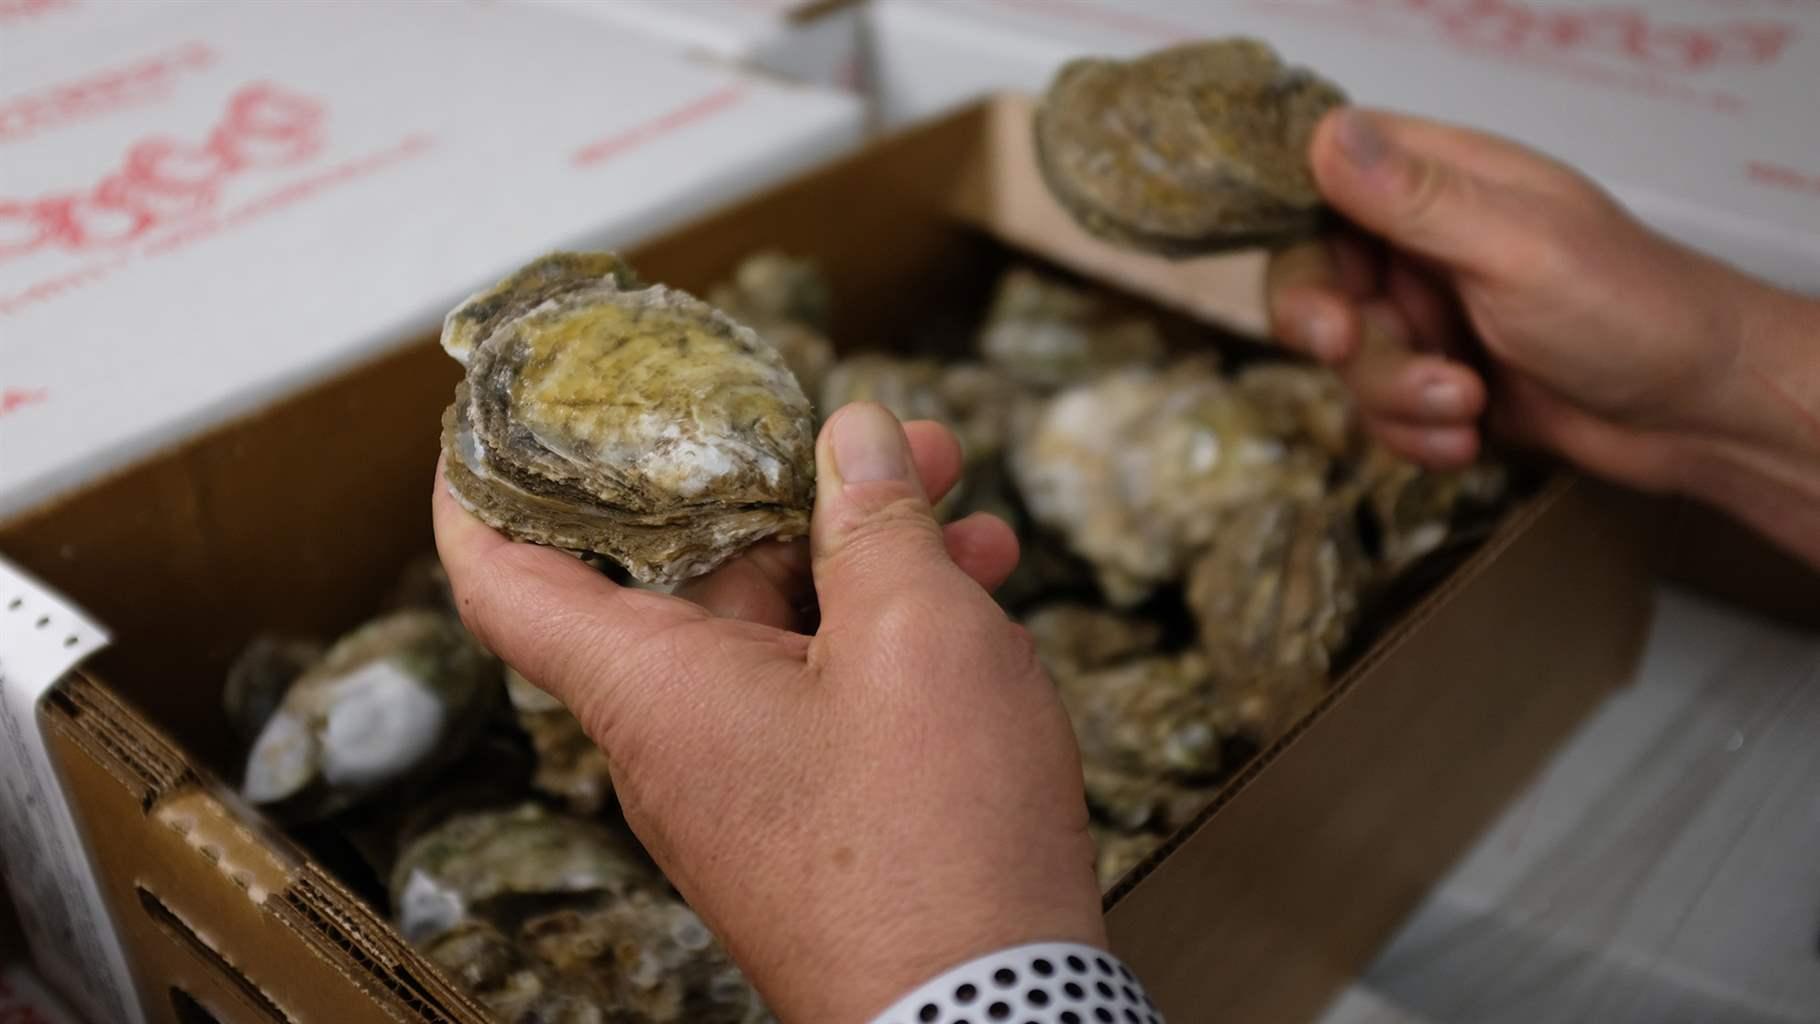 Texas Says Shucks, Let's Give Oyster Growing a Try - The Pew Charitable Trusts